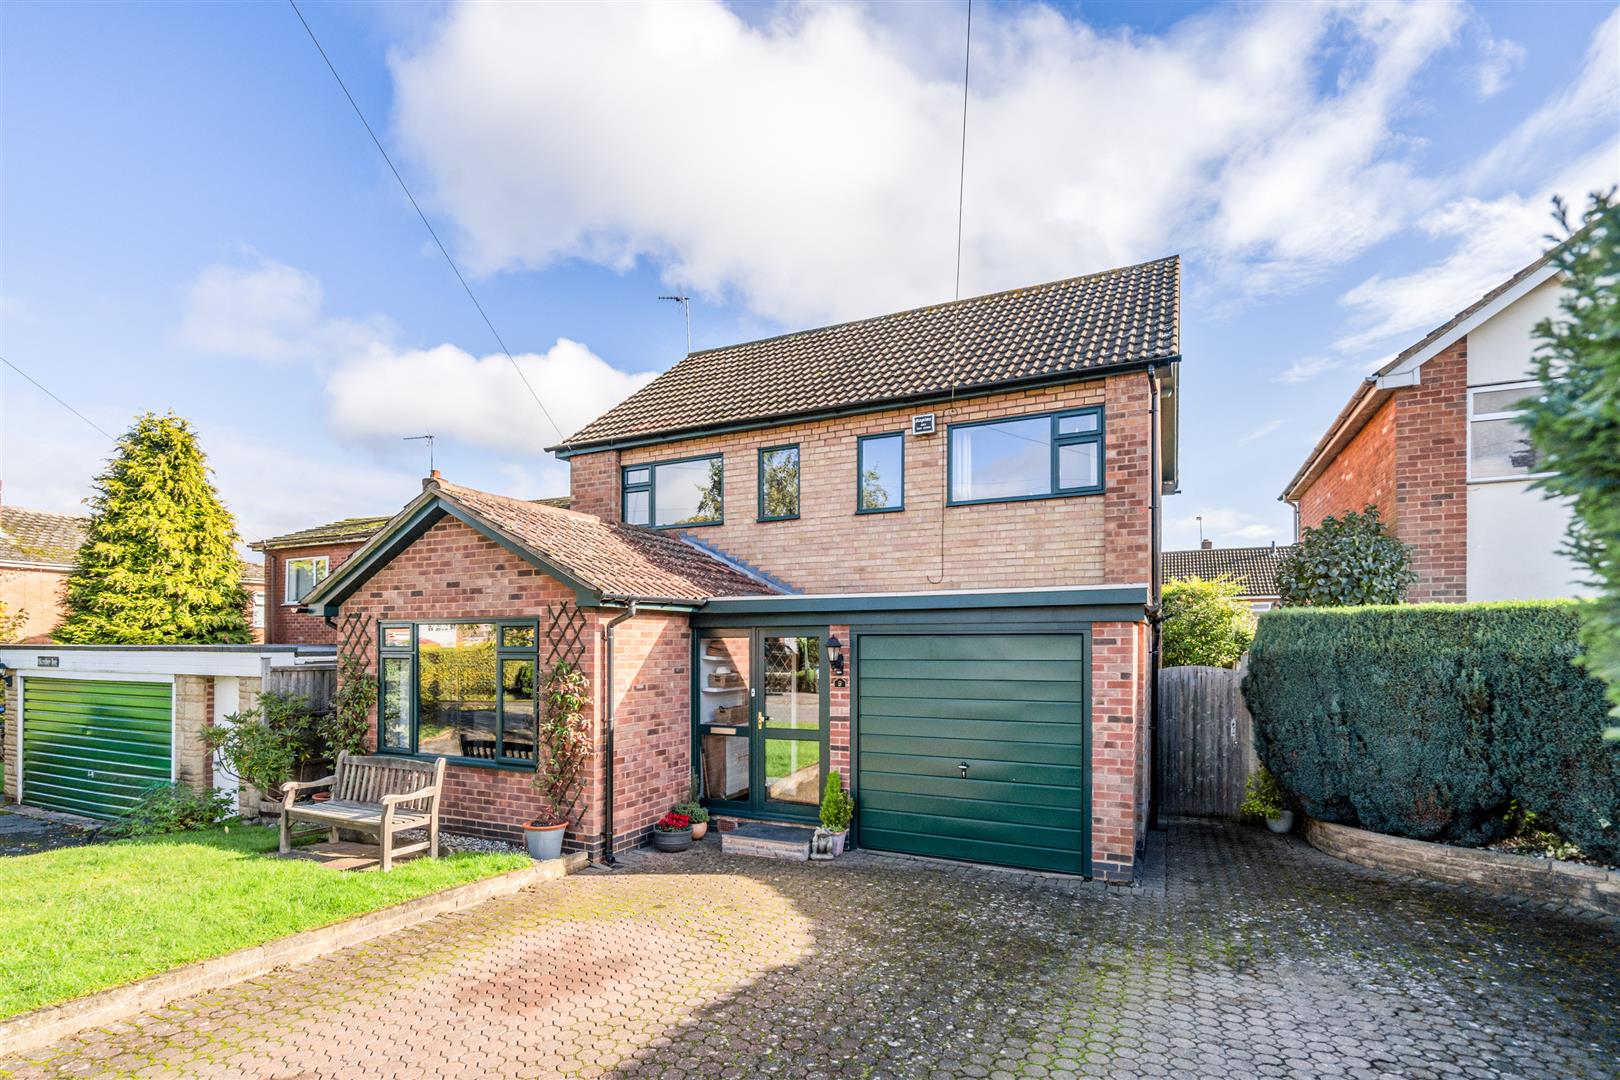 4 bed detached house for sale in Fentham Close, Solihull  - Property Image 1